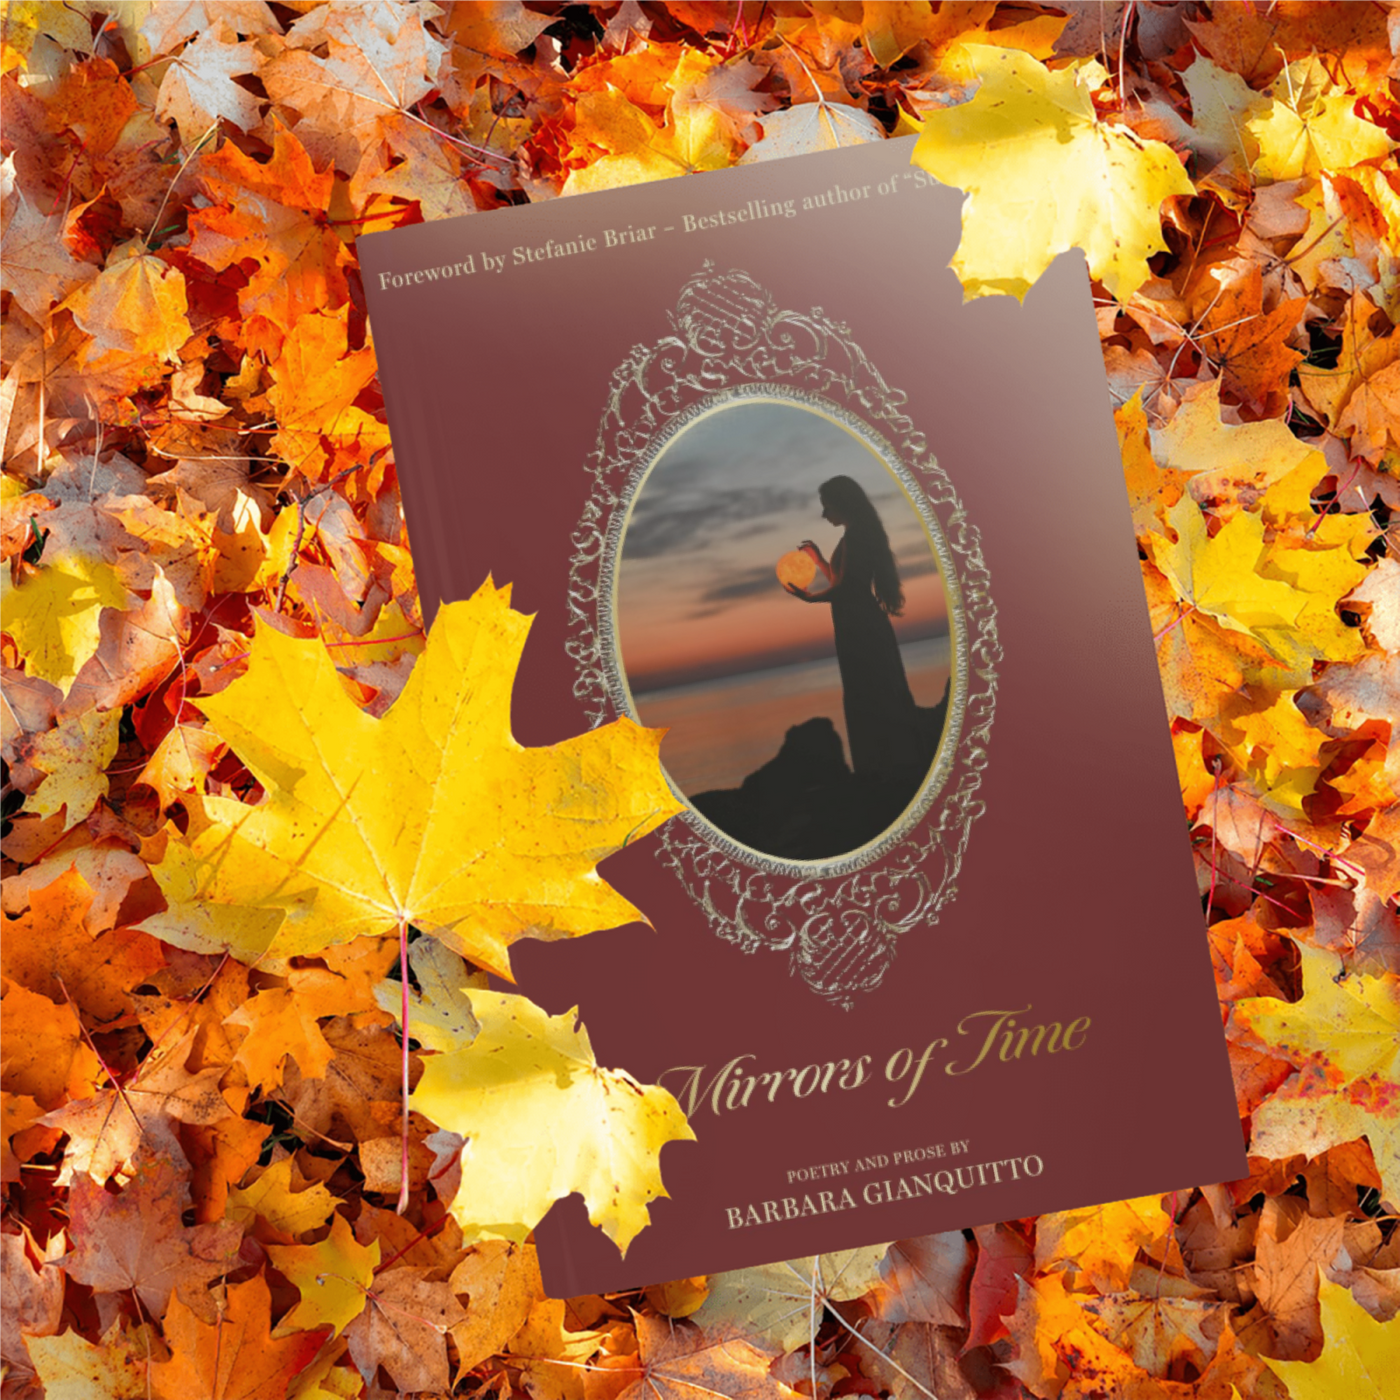 Mirrors of Time - Poems about soulmate love across time and space